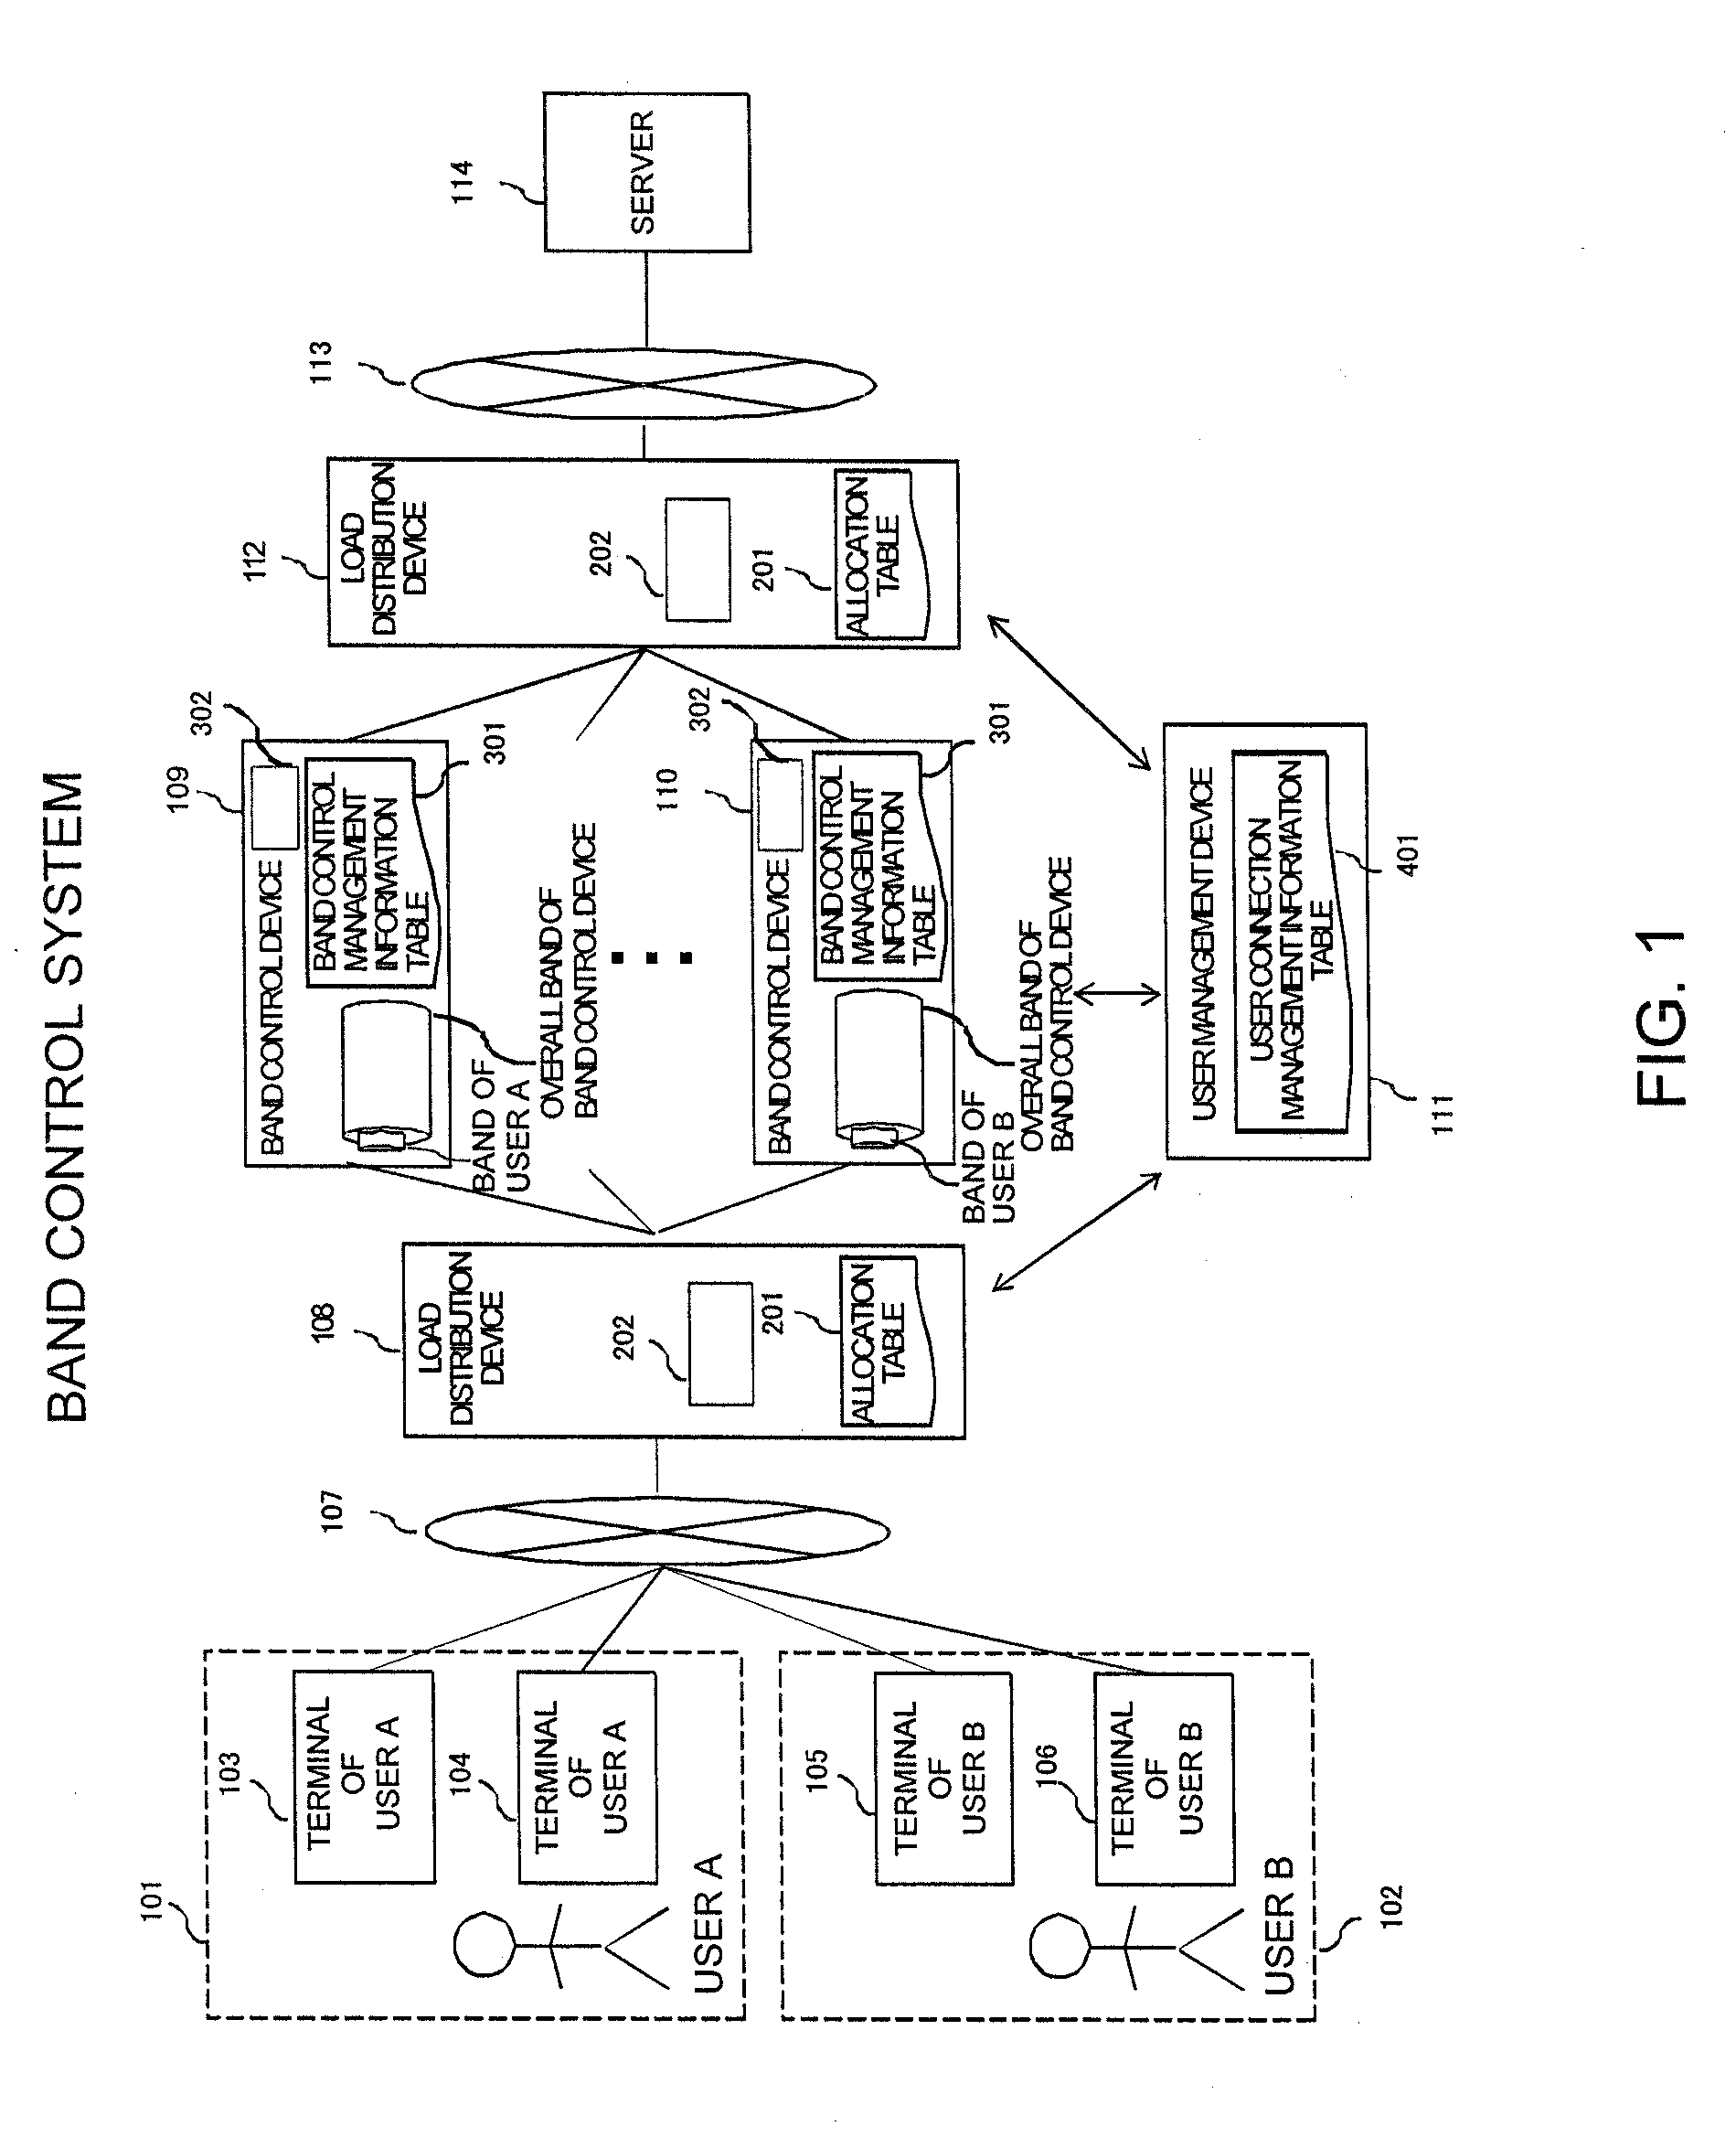 Band control system, load distribution device and band control device